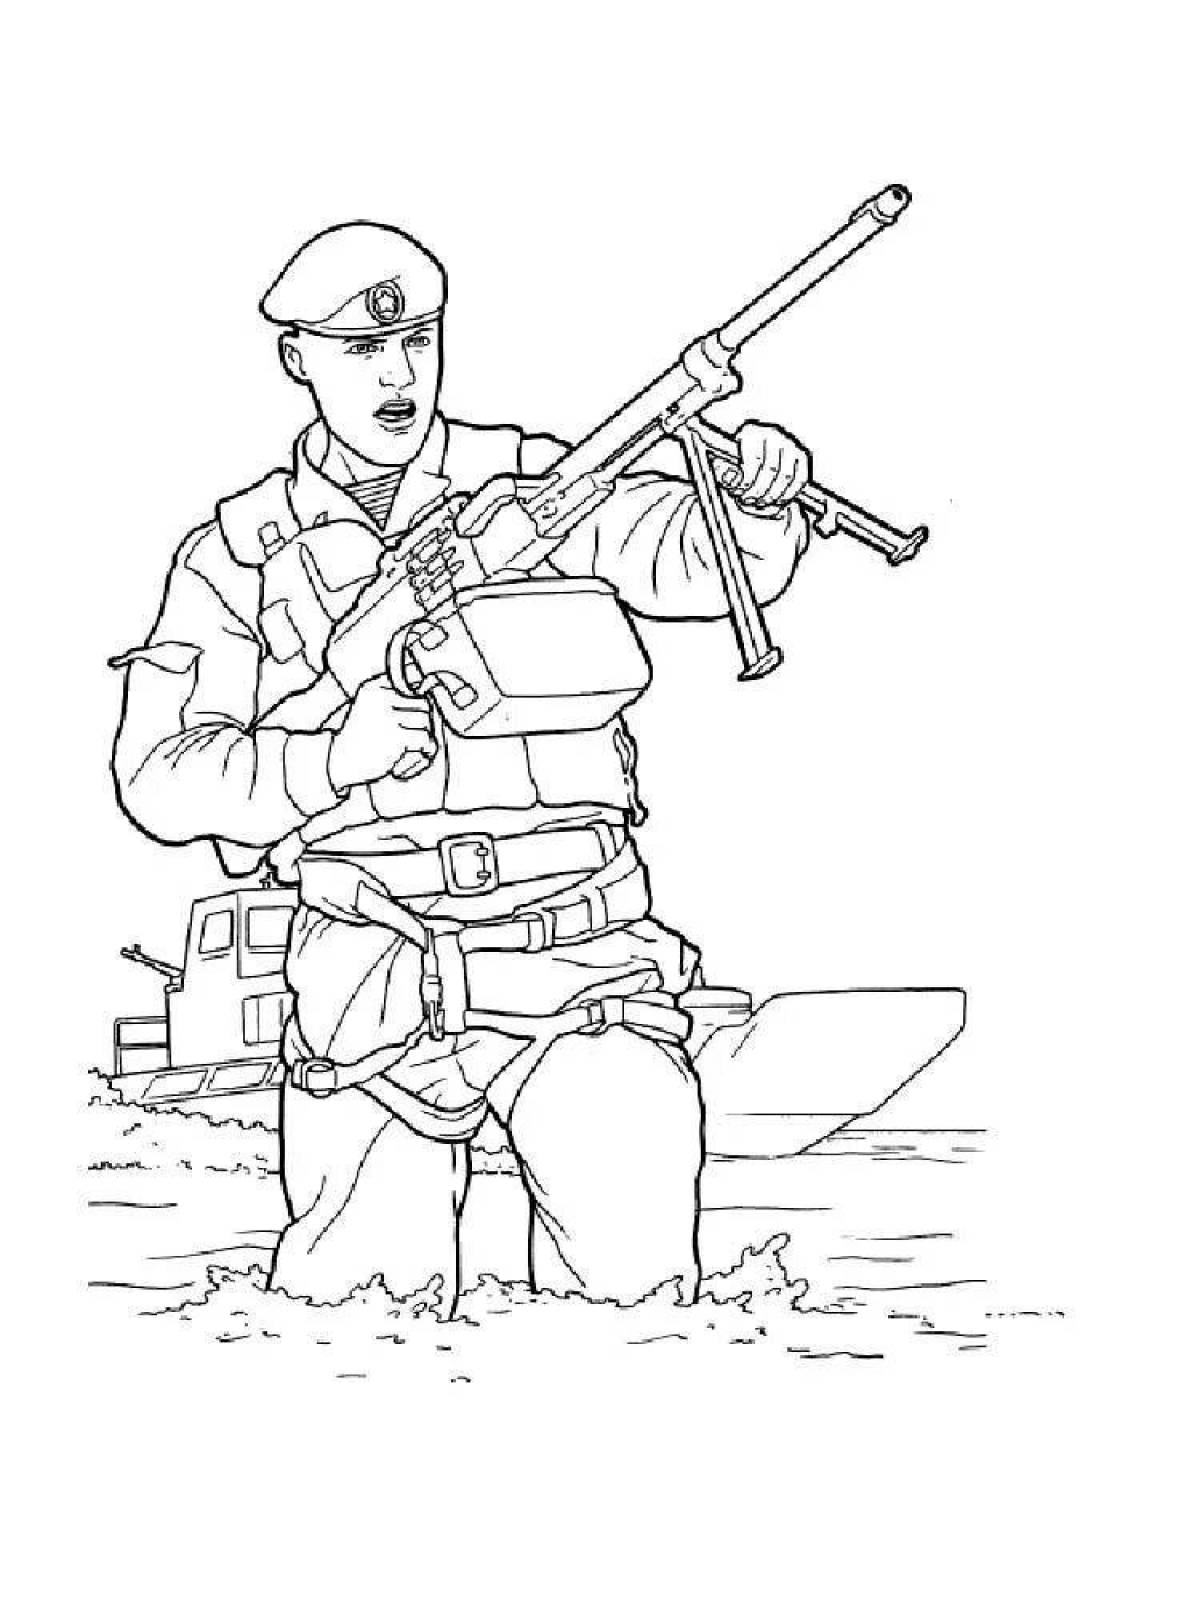 Charming soldier coloring page 23 February